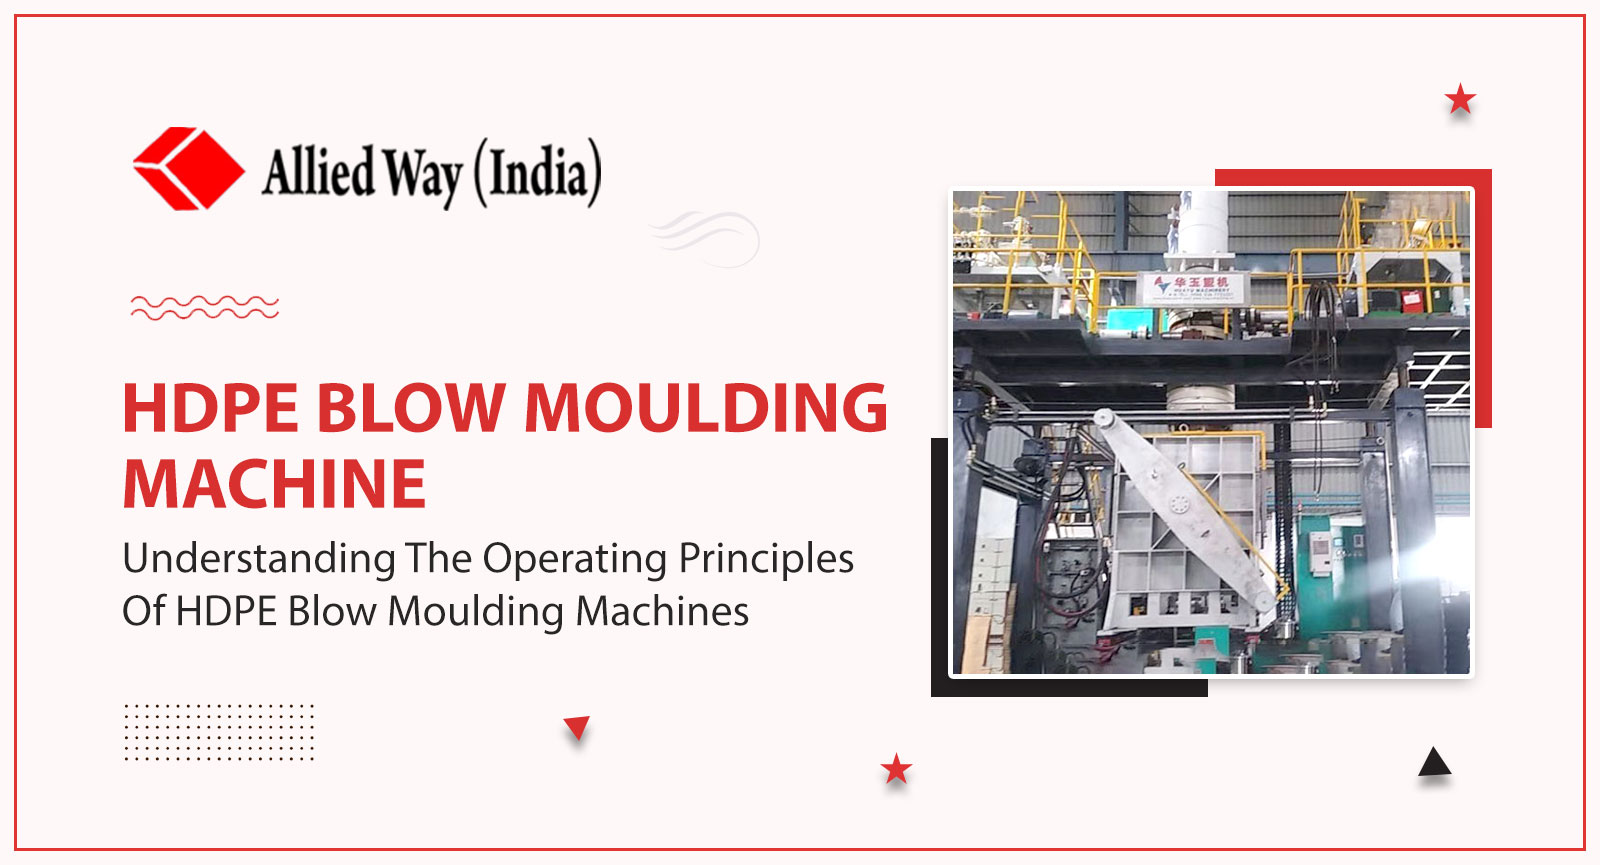 Understanding the Operating Principles of HDPE Blow Moulding Machines, Allied Way (India)